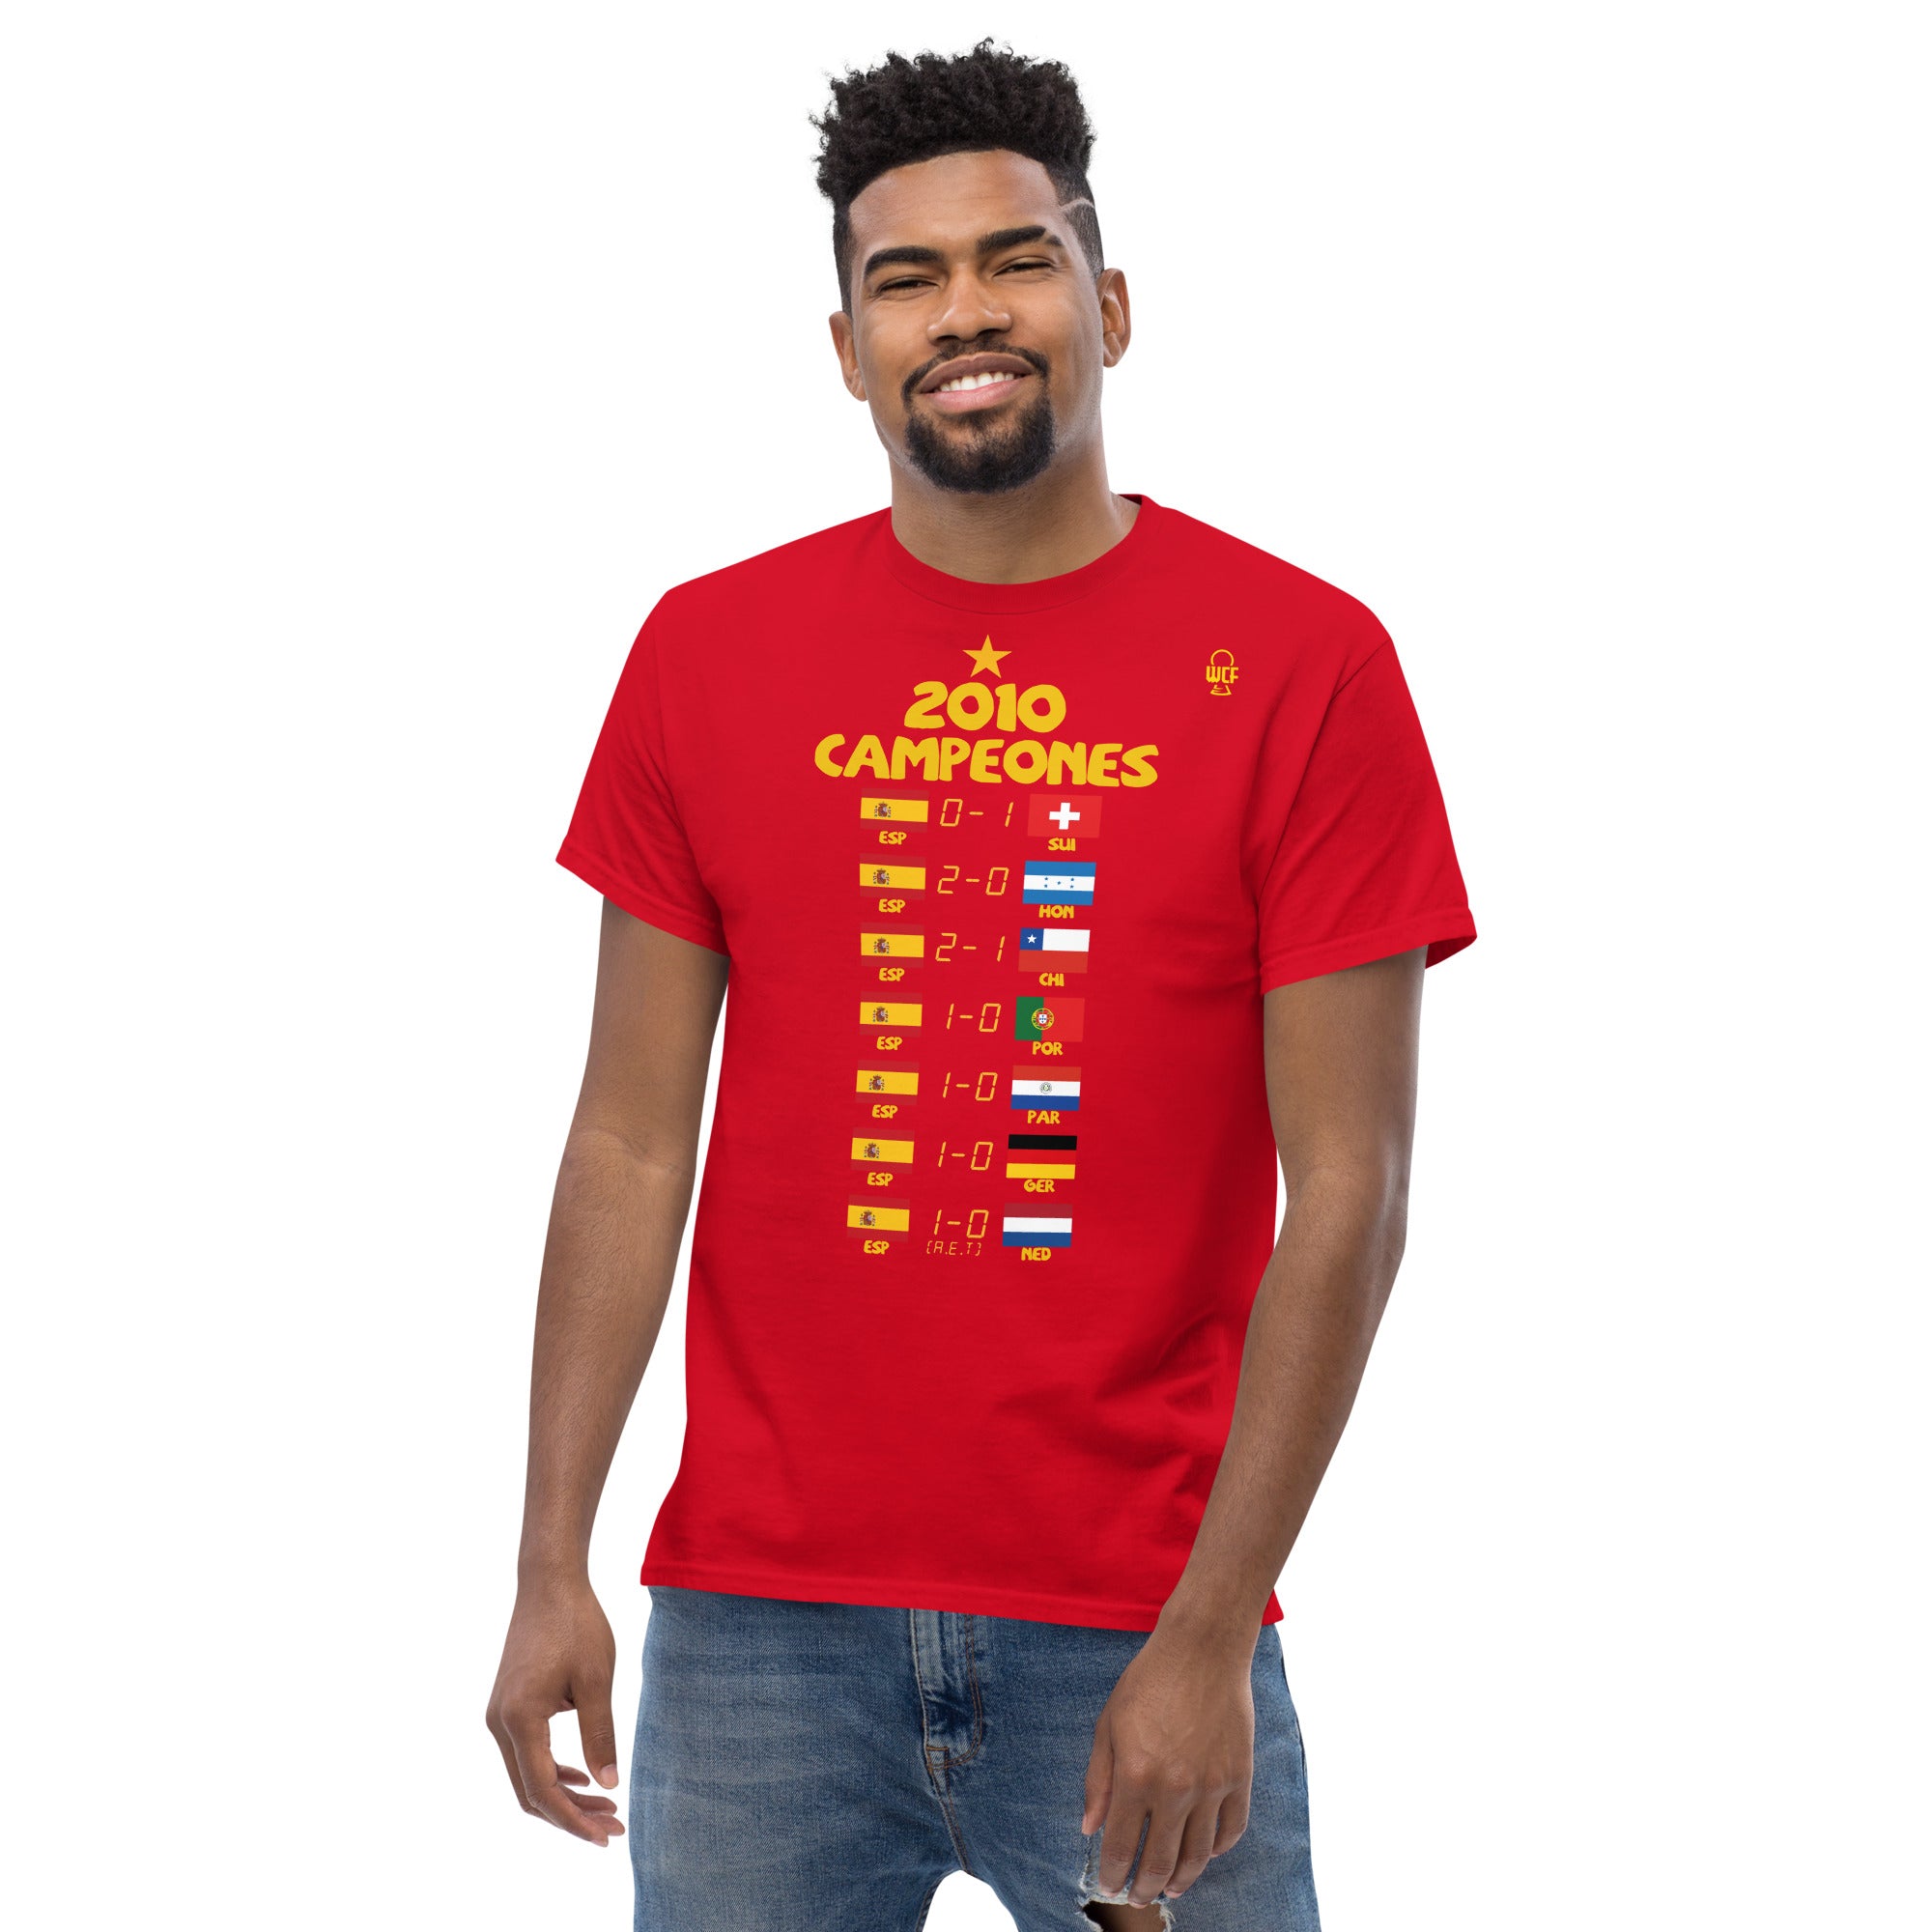 World Cup 2010 Classic T-Shirt - Road to the Glory - Spain